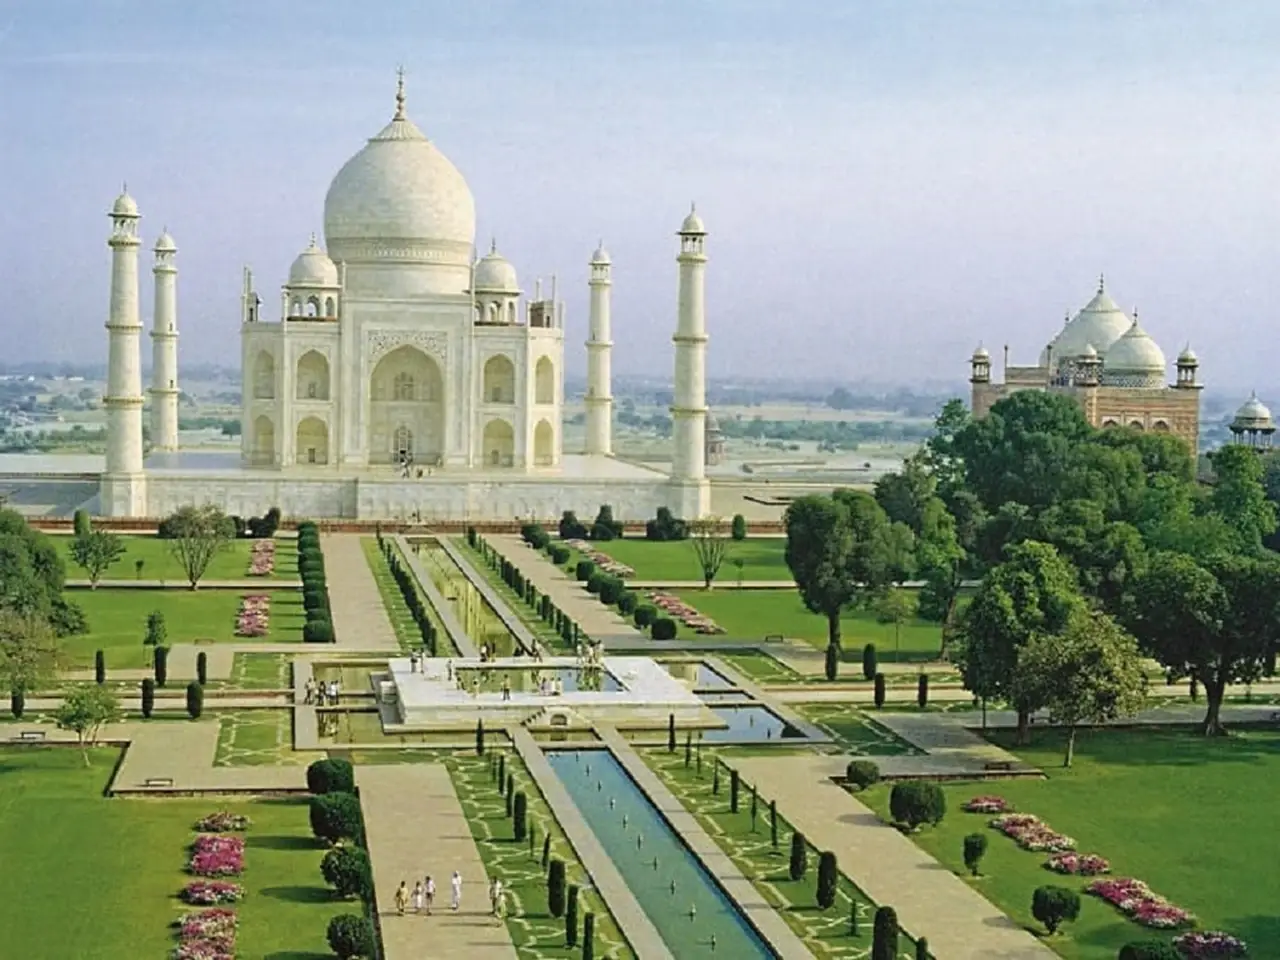 The Taj Mahal is surrounded by beautiful Persian gardens.  The garden style seen within the Taj Mahal complex is Persian Timurid.